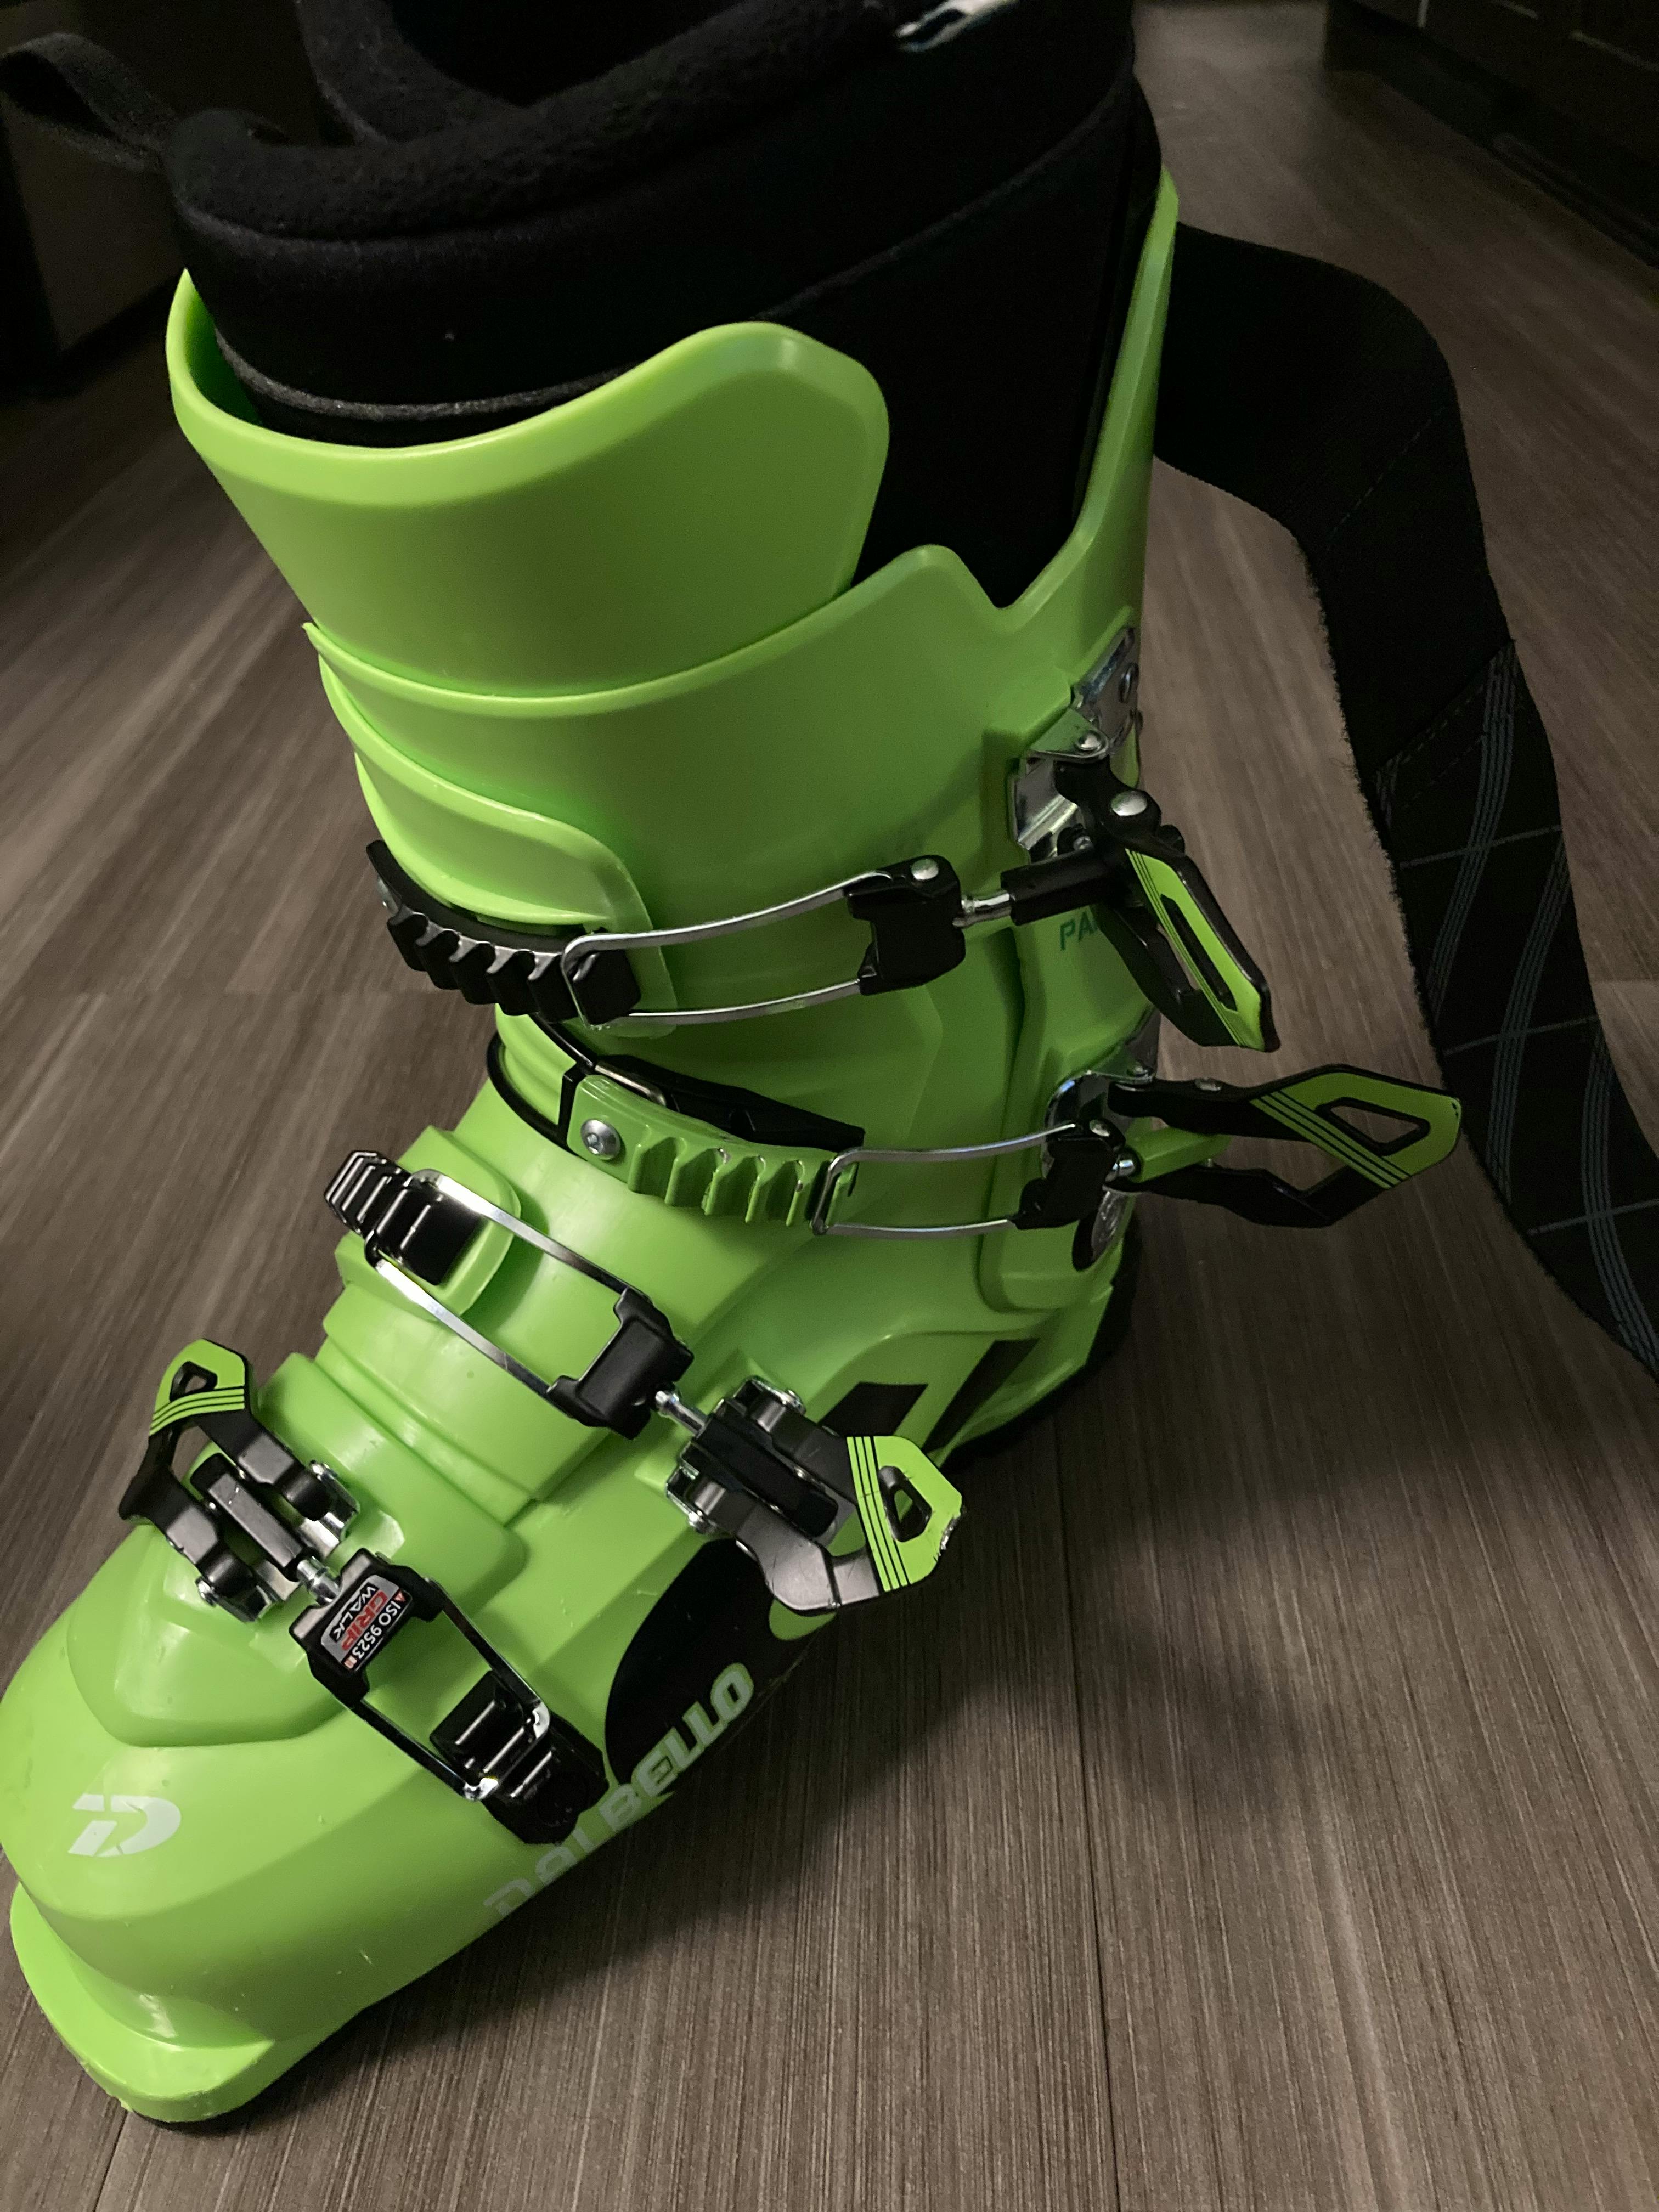 A lime green and black ski boot getting tried on indoors